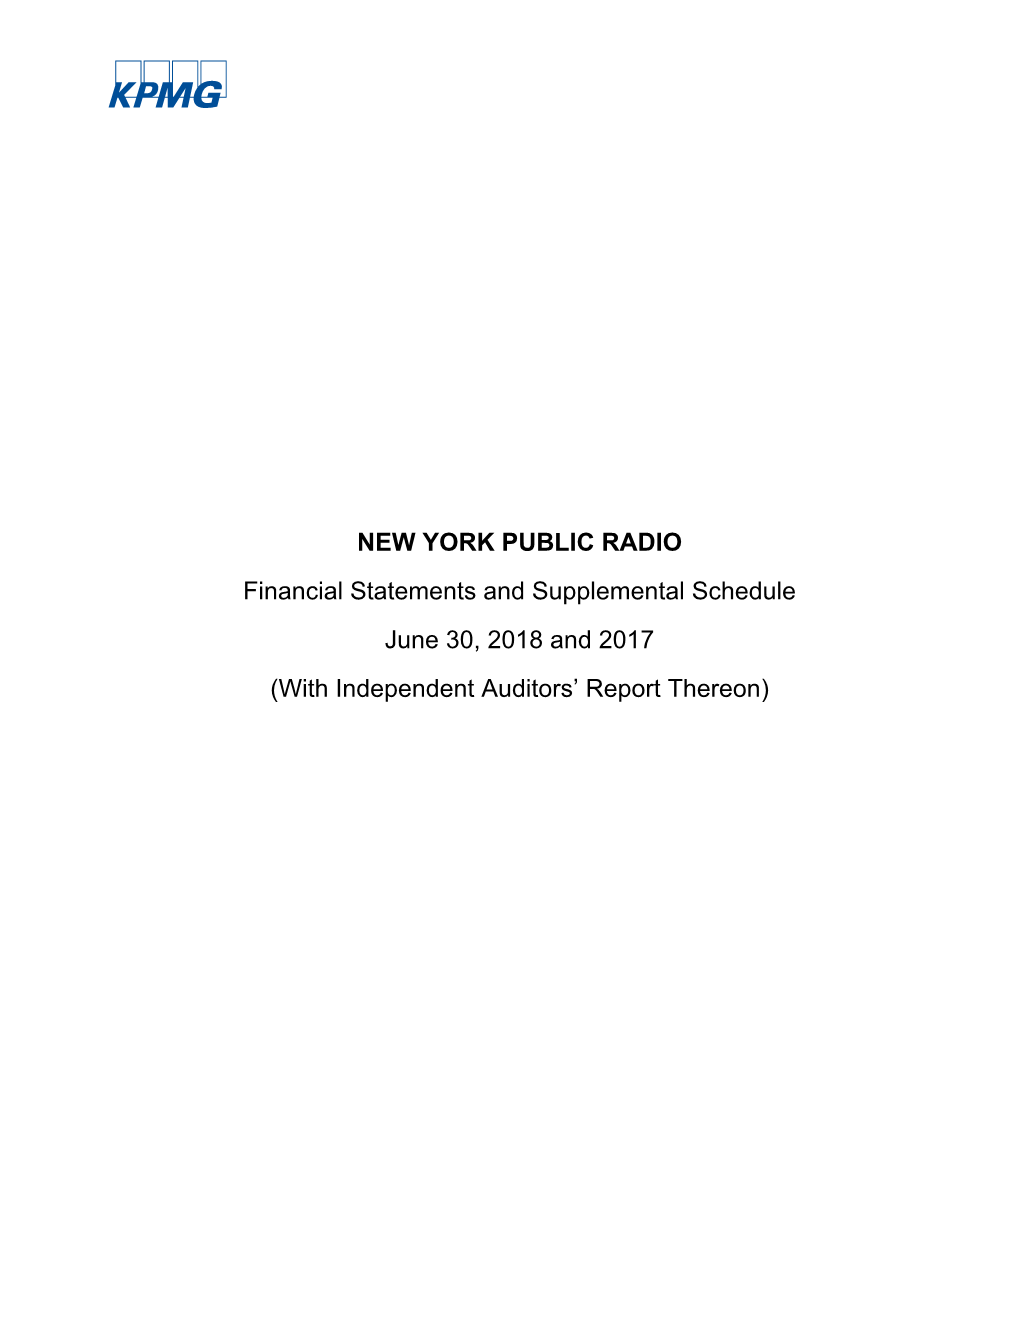 NEW YORK PUBLIC RADIO Financial Statements and Supplemental Schedule June 30, 2018 and 2017 (With Independent Auditors’ Report Thereon)